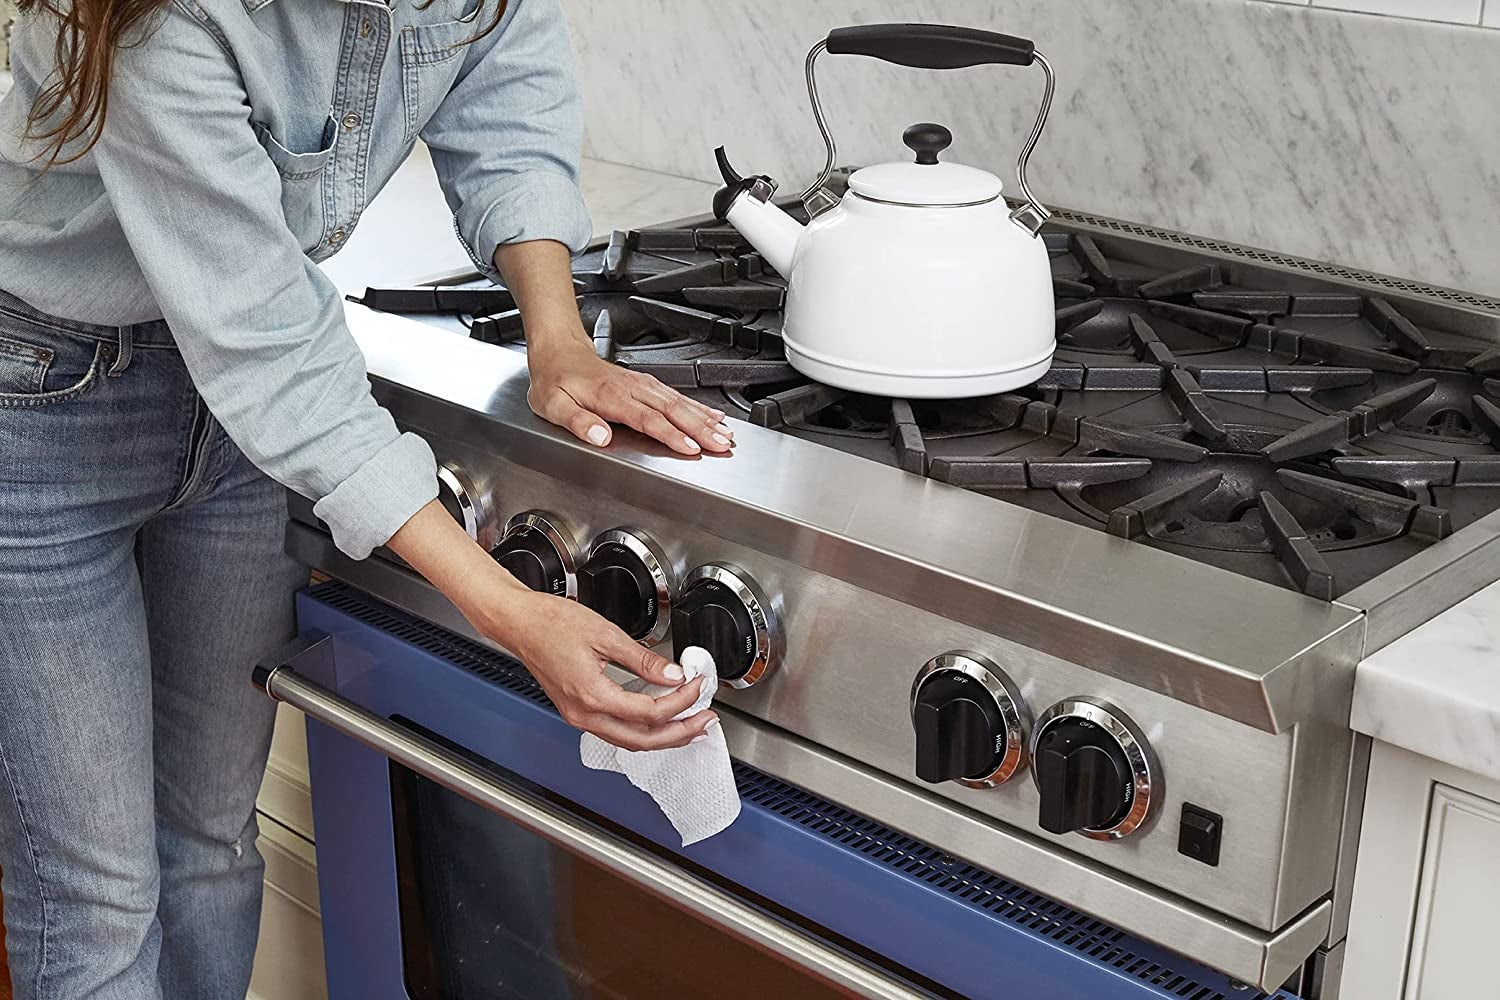 model uses wipe to clean stove handles in kitchen